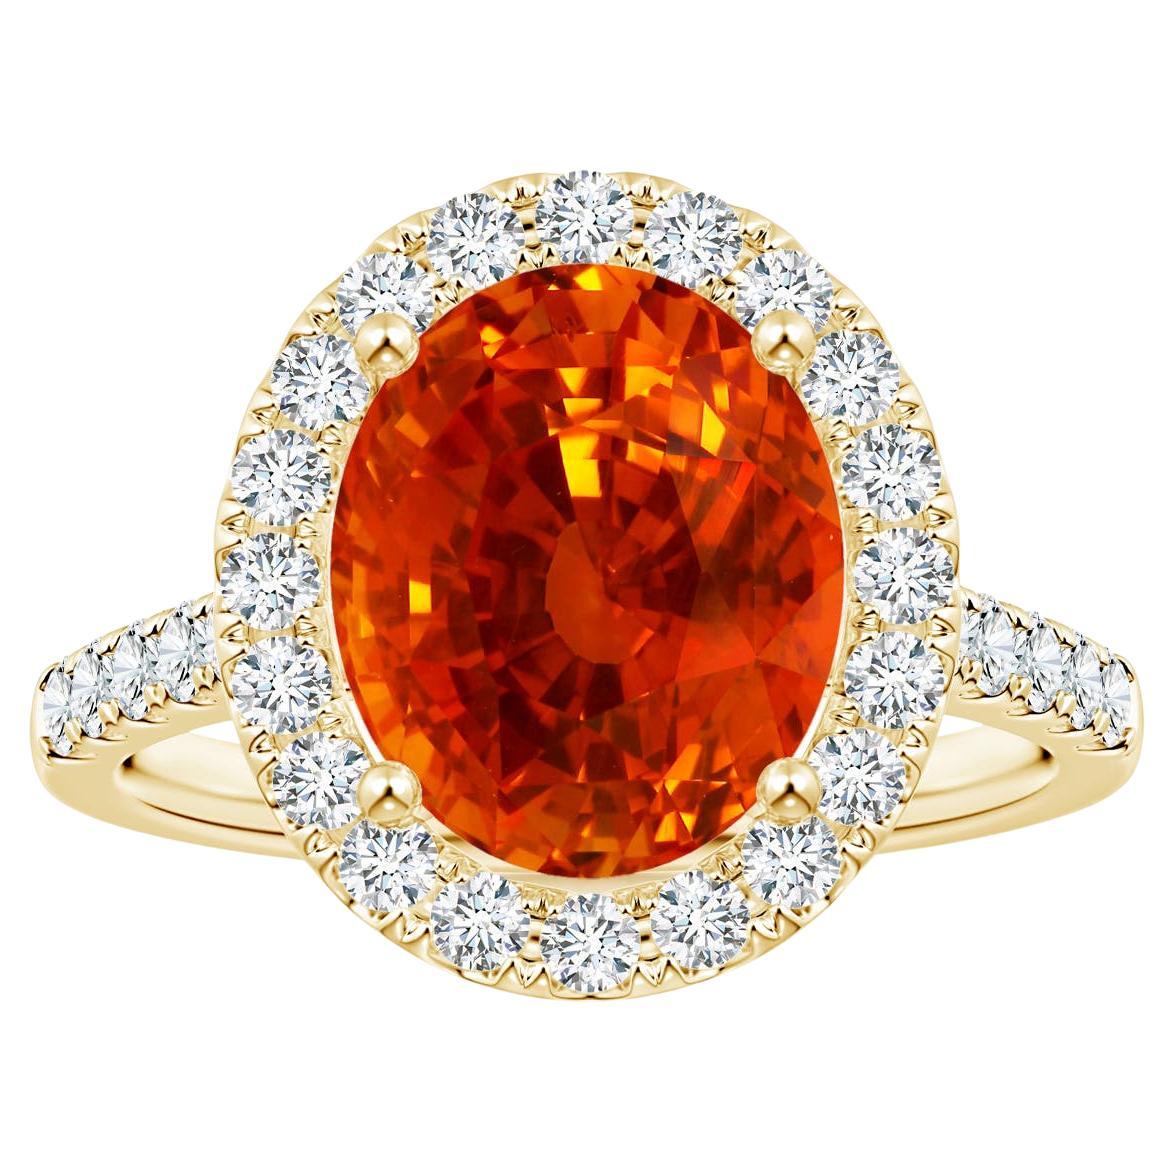 For Sale:  ANGARA GIA Certified Natural Orange Sapphire Diamond Halo Ring in Yellow Gold